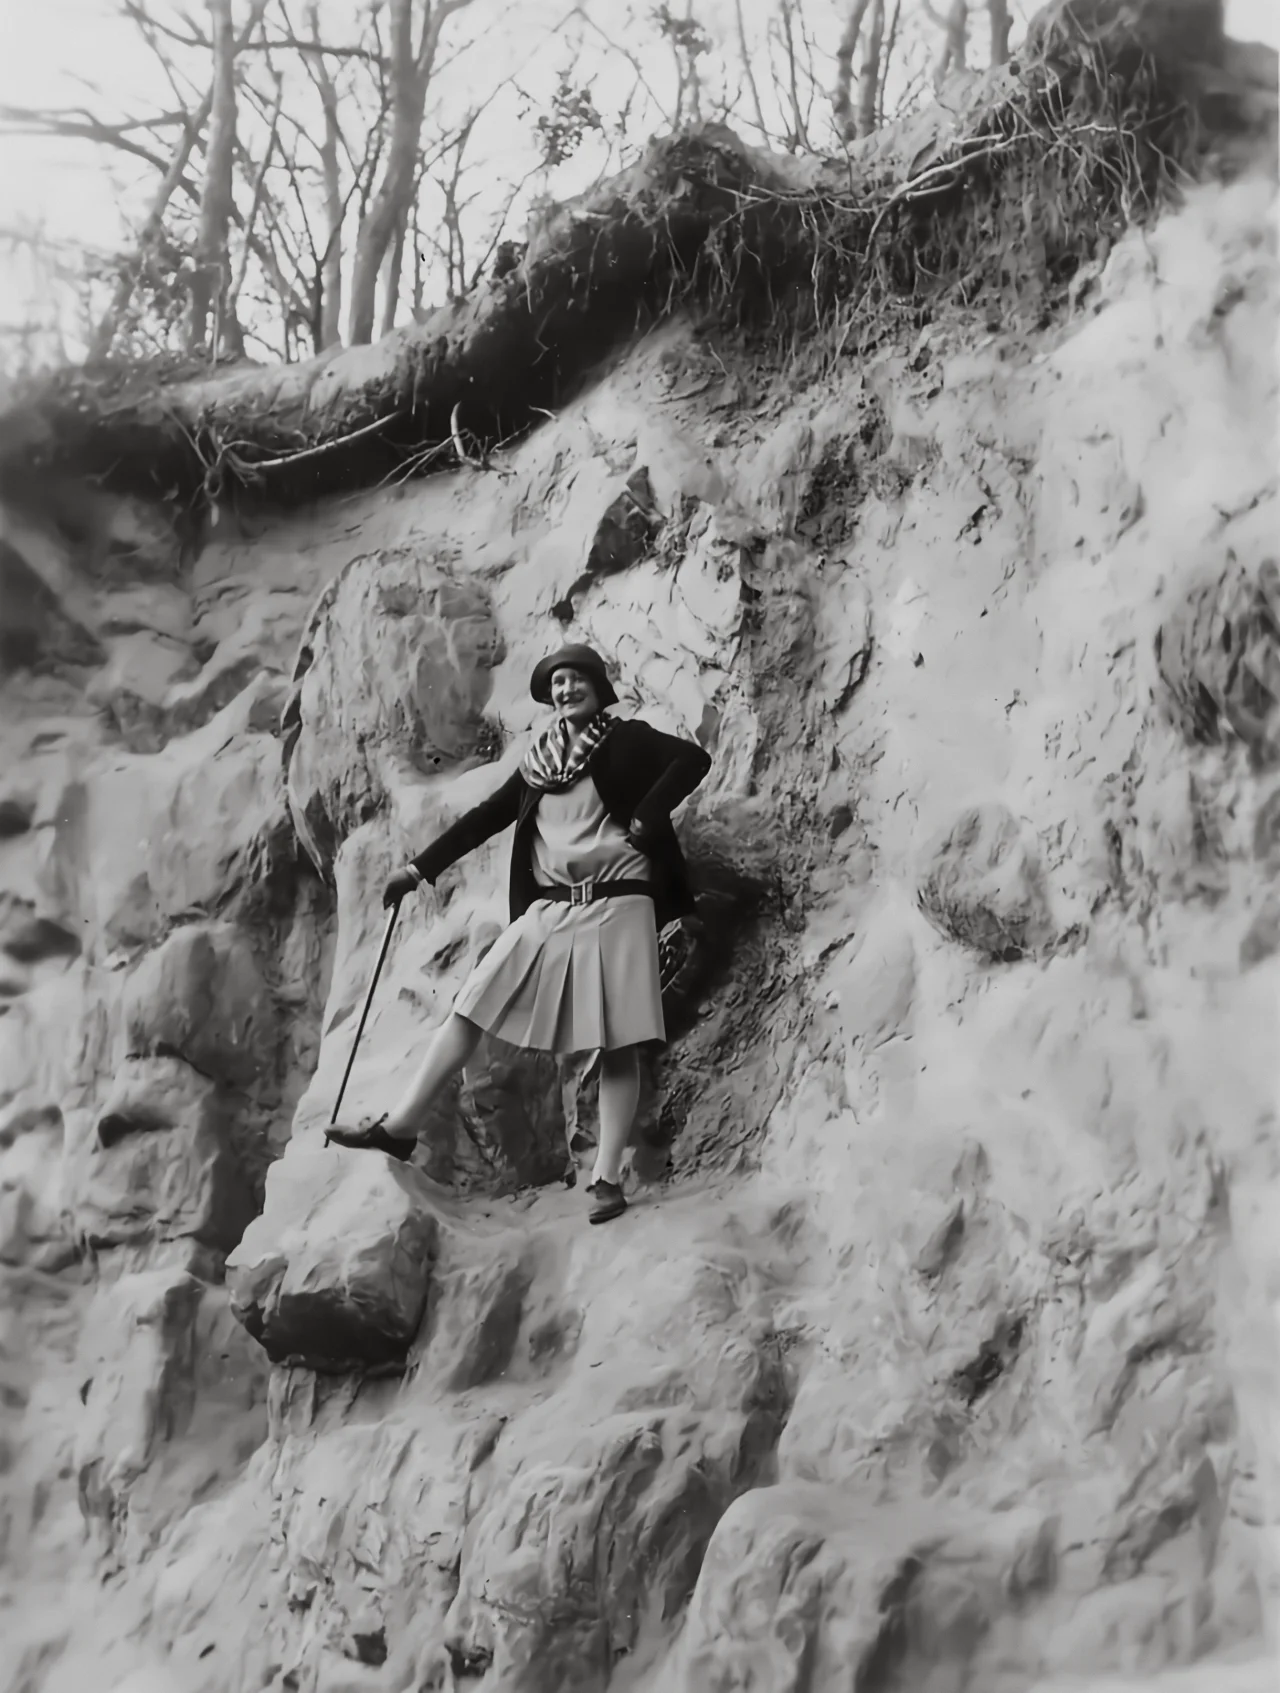 Virginia Hall poses on top of a rock with her walking stick